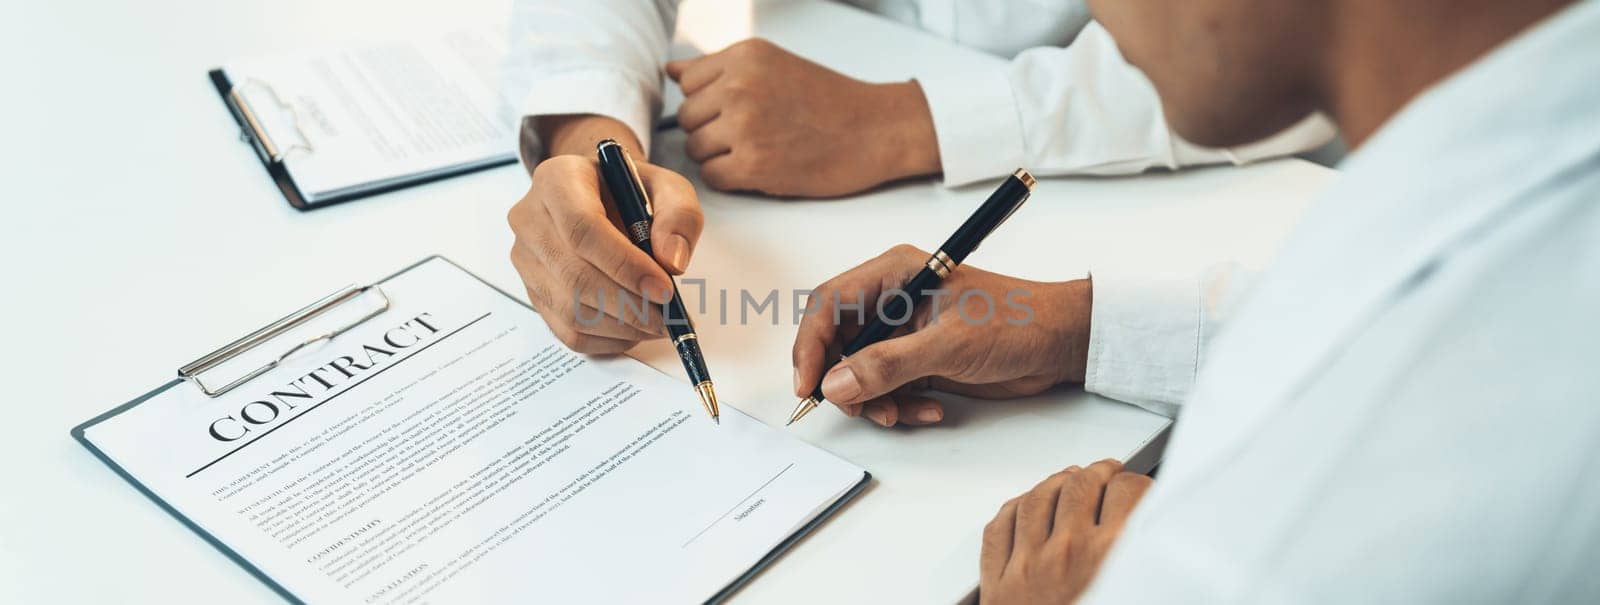 Business executive signing contract agreement document on the bale with the help from company attorney or lawyer service in law firm office. Business investing and finalizing legal processing. Shrewd